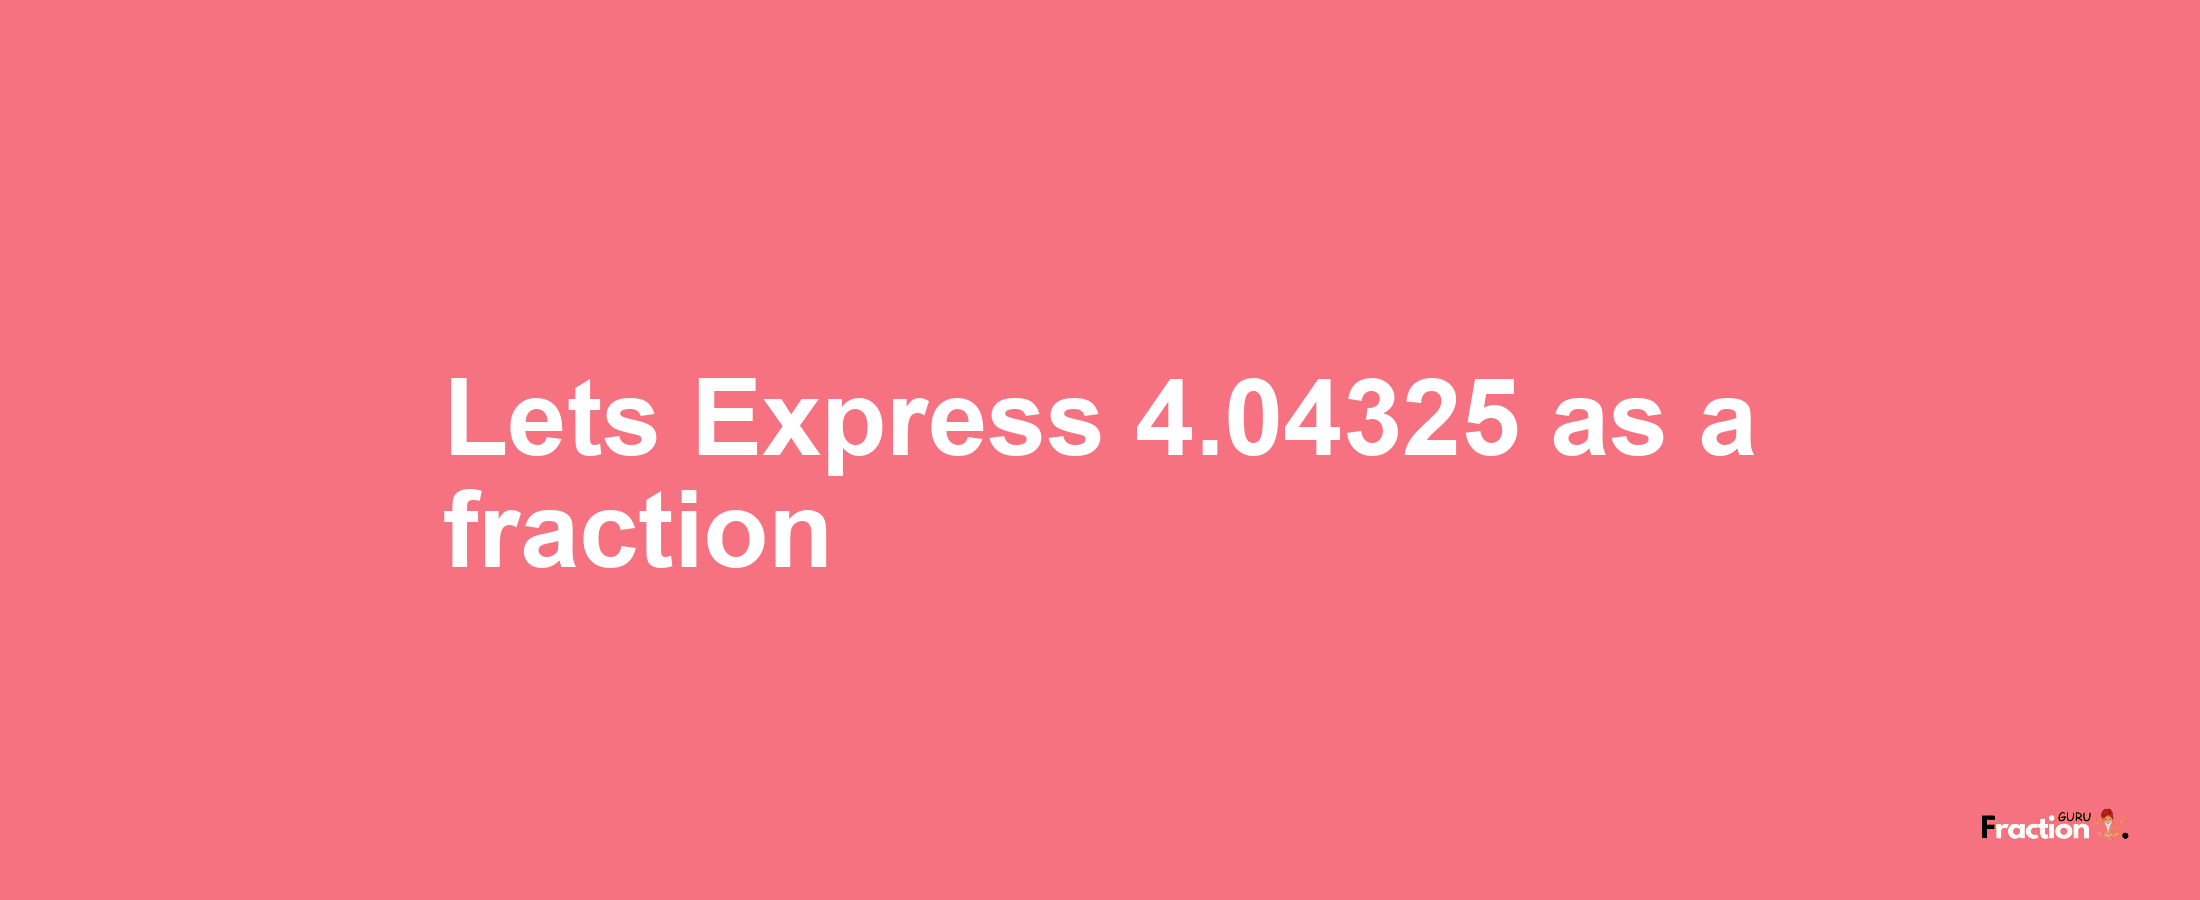 Lets Express 4.04325 as afraction